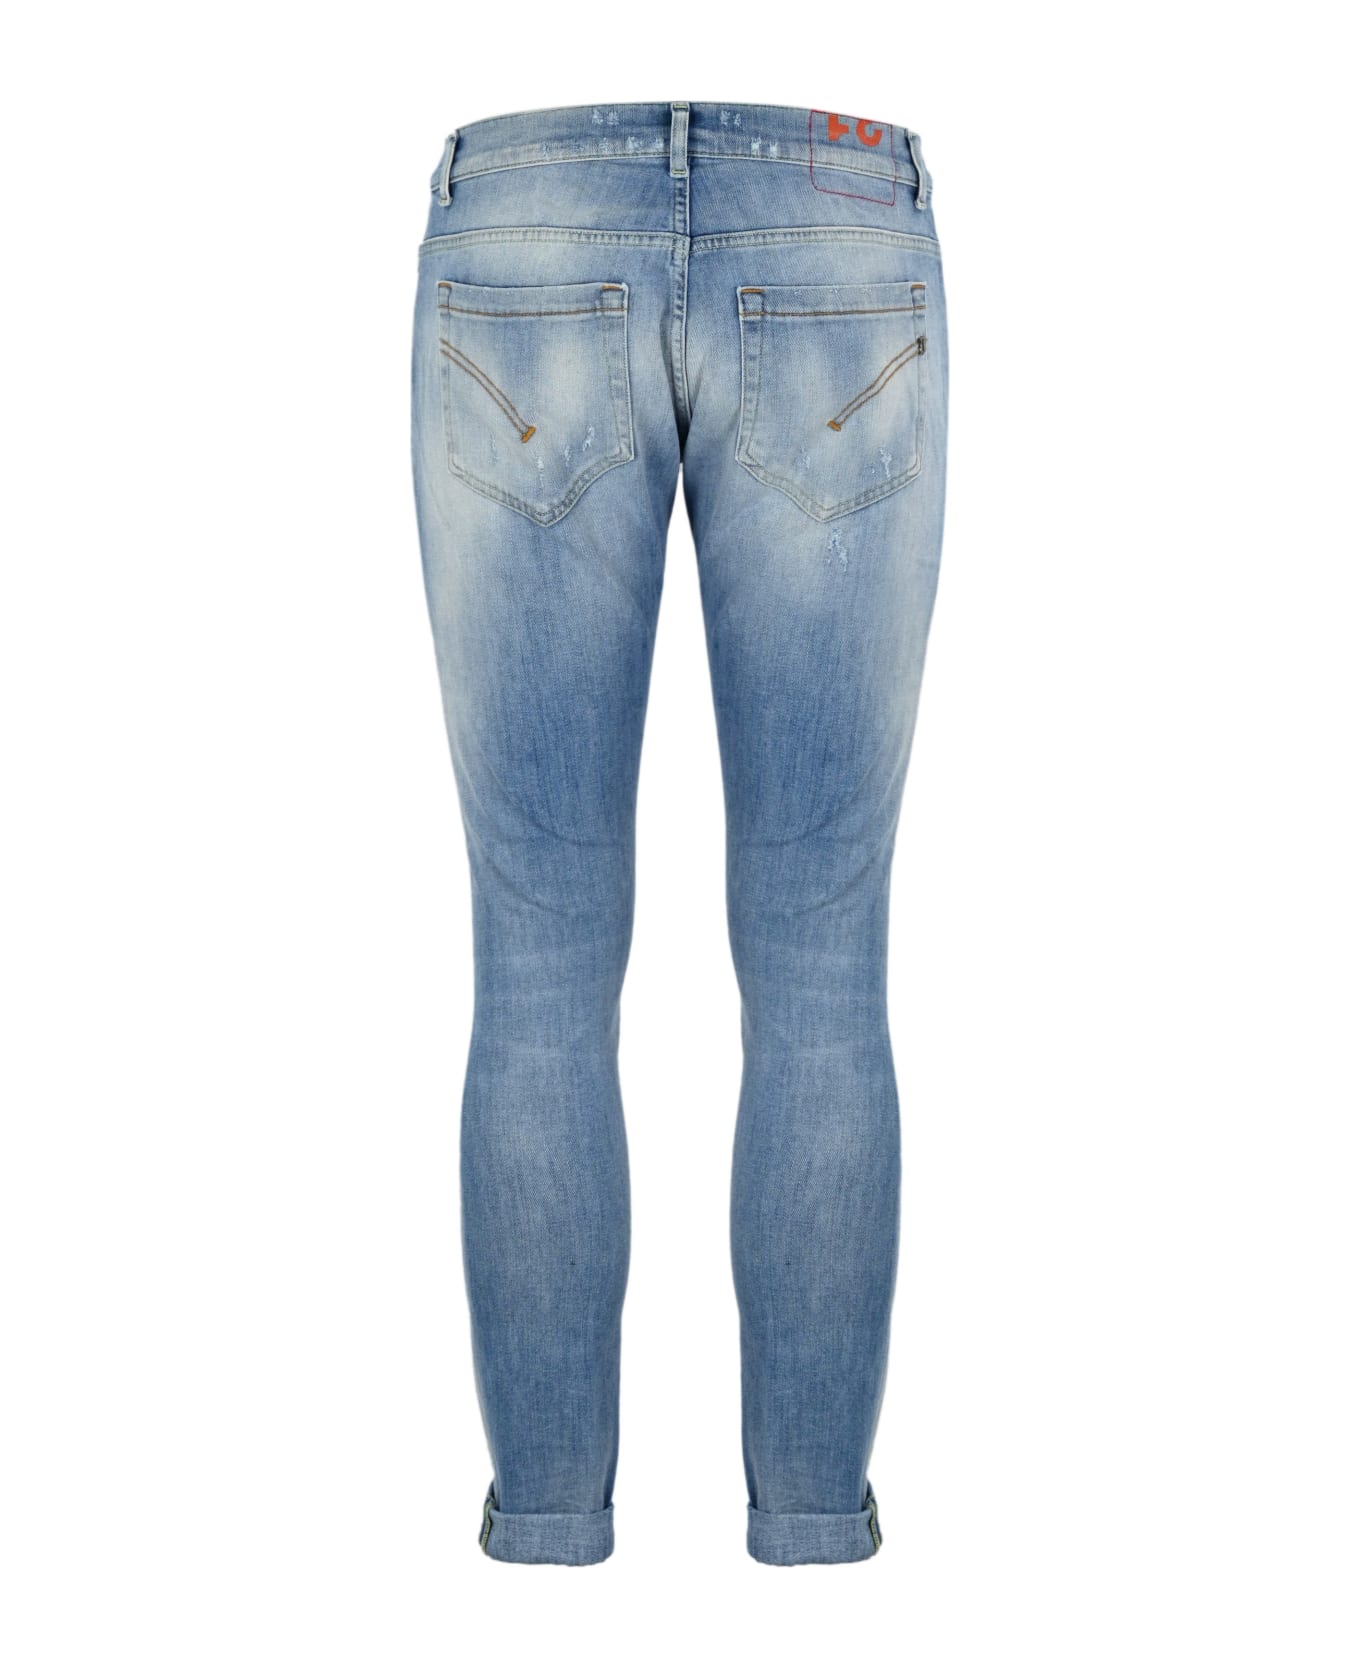 Dondup George Jeans In Denim With Tears - Blue